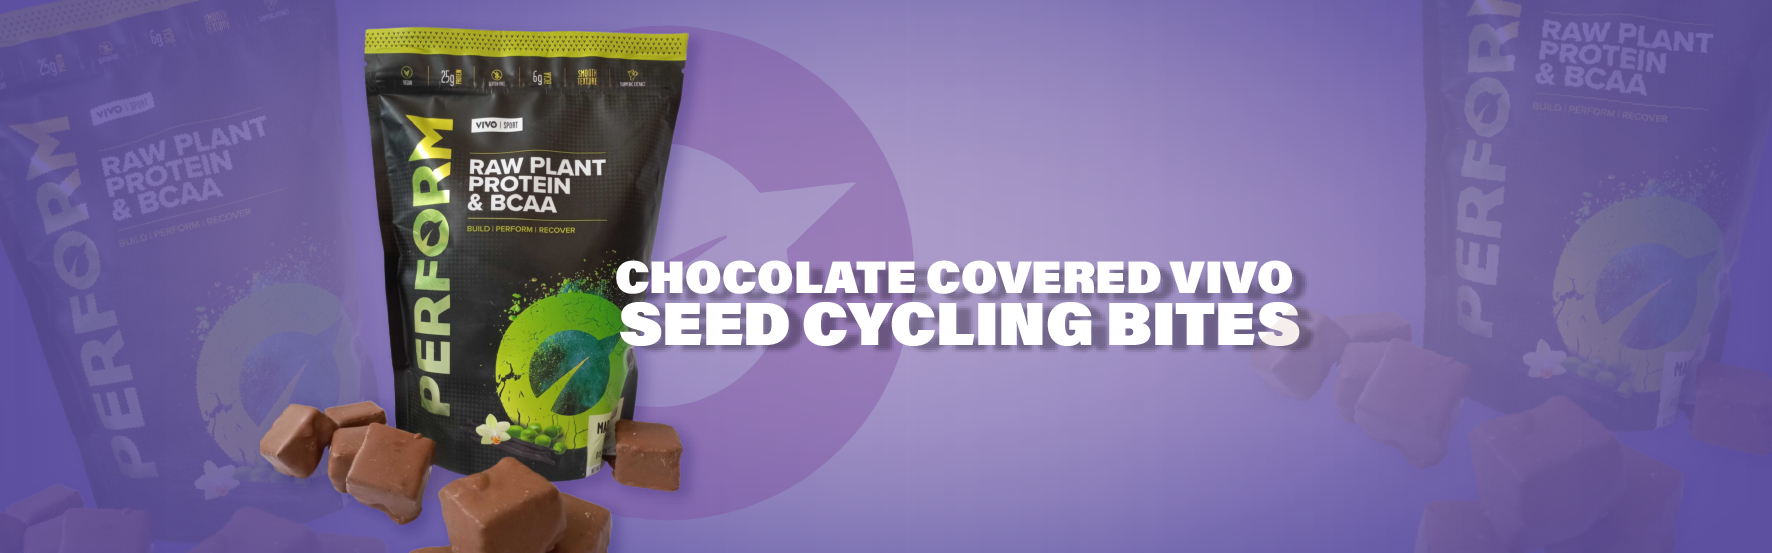 VIVO Chocolate Covered Seed Cycling Bites